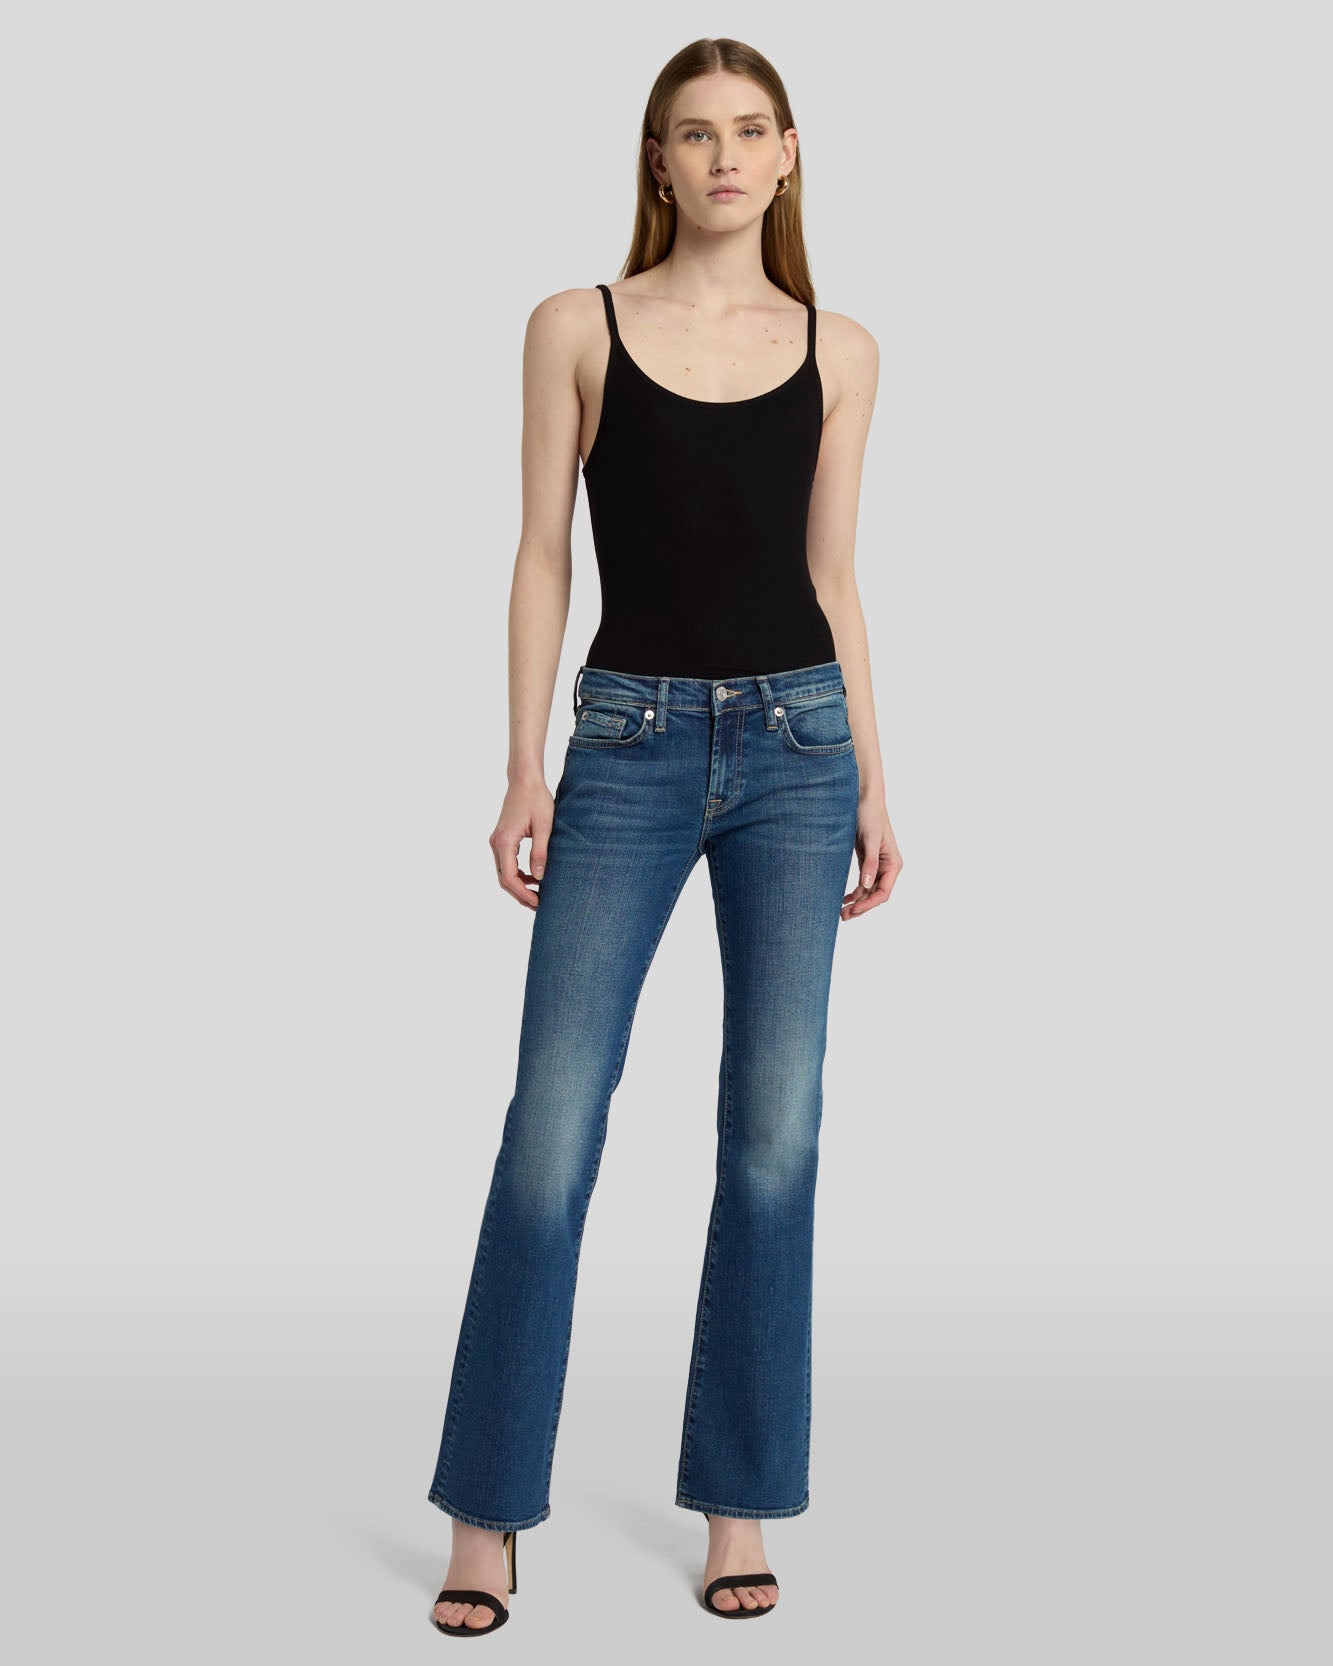 Apt 9 Jean Bootcut Mid Rise Straight Hip Thigh Heavily Embellished Dark  Jeans 